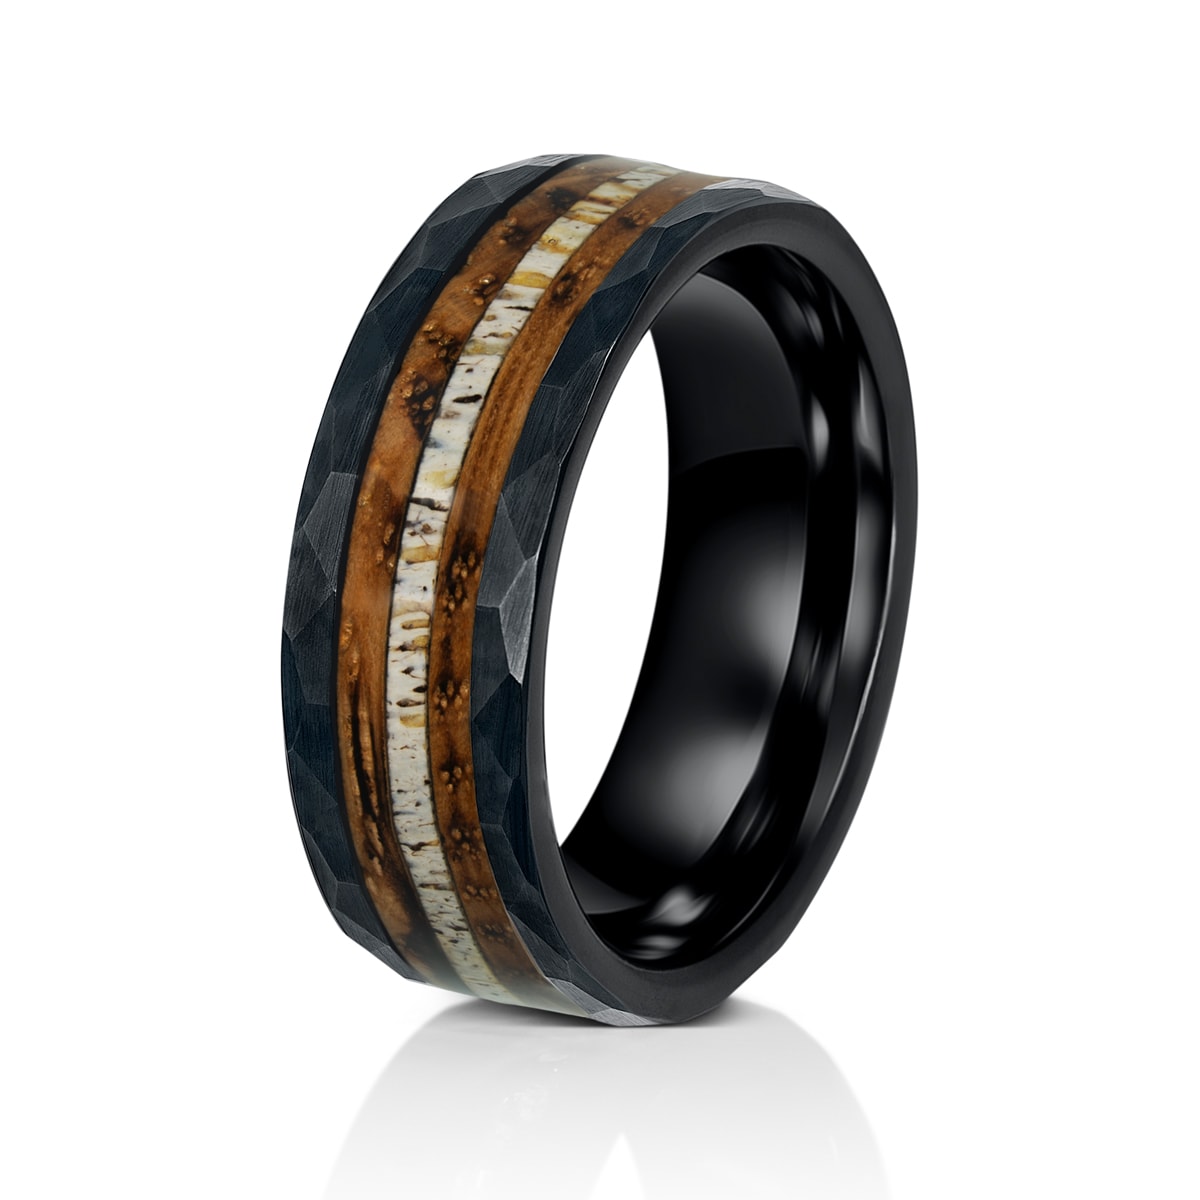 Hammered black mens ring with antler inlay